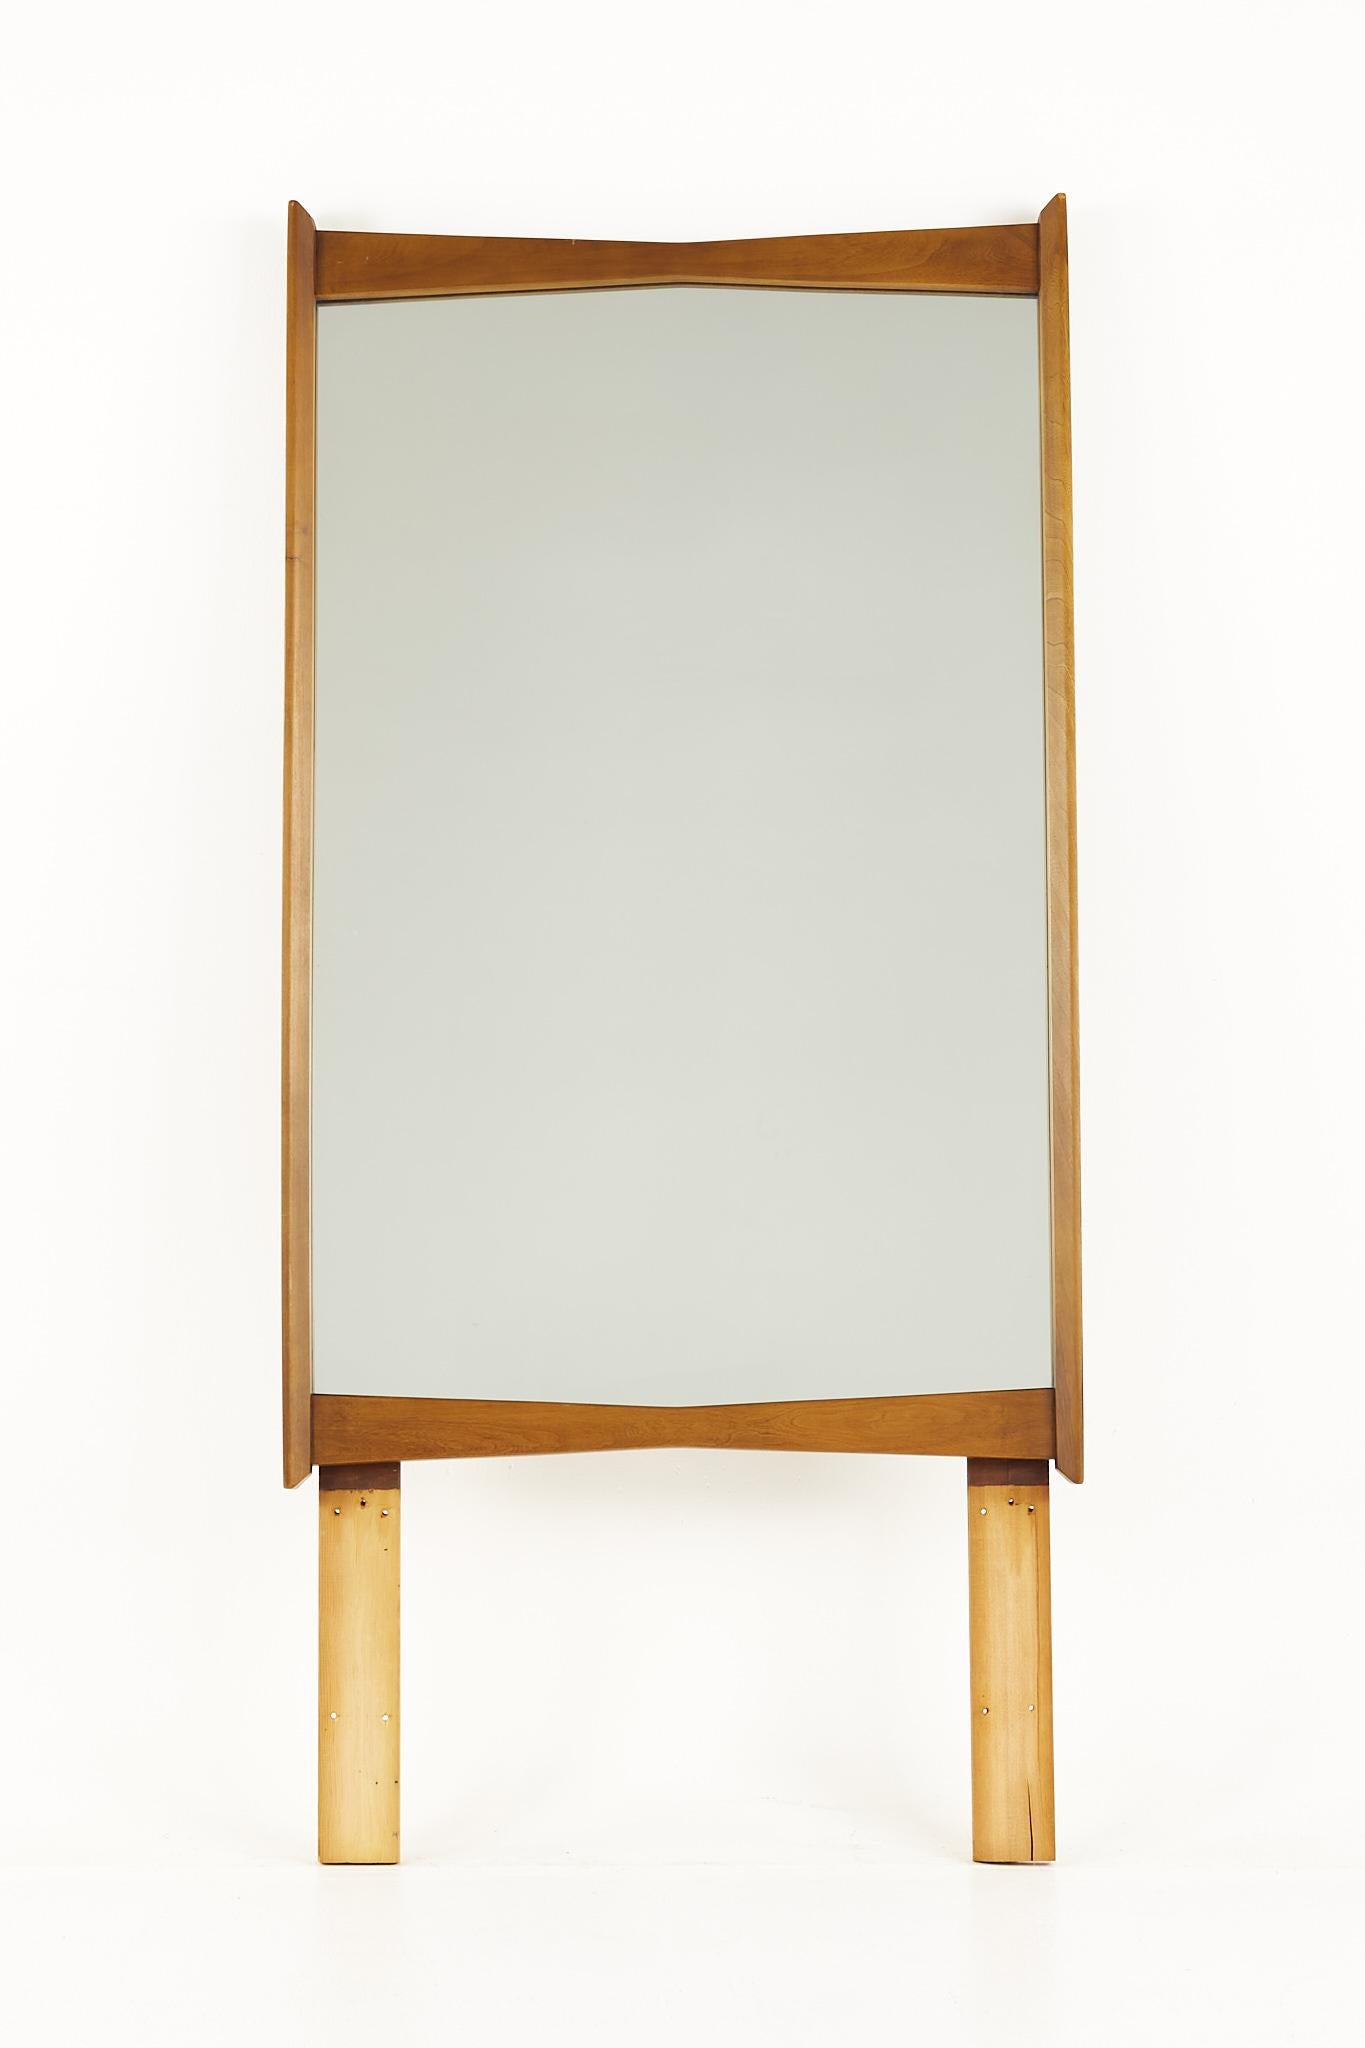 Kent Coffey tableau mid century walnut mirror

This mirror measures: 27.25 wide x 2.75 deep x 44.75 inches high

All pieces of furniture can be had in what we call restored vintage condition. That means the piece is restored upon purchase so